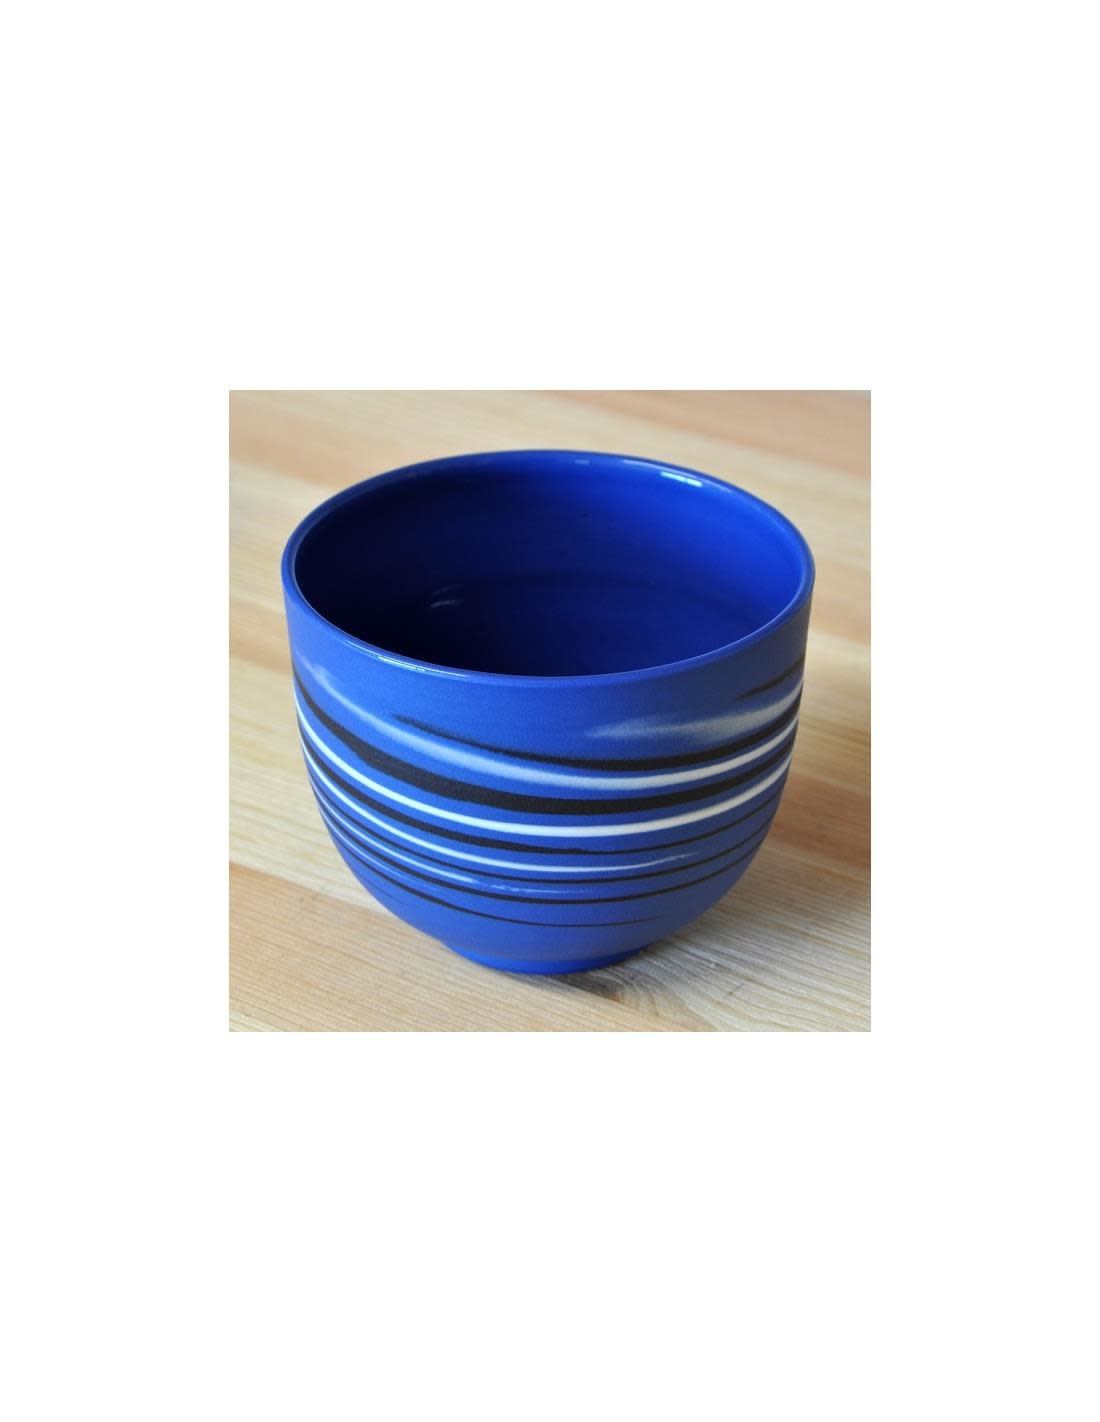 Sio-2 Speciality Clay Sio-2 Clay Blue Upsala Porcelain (5kg)